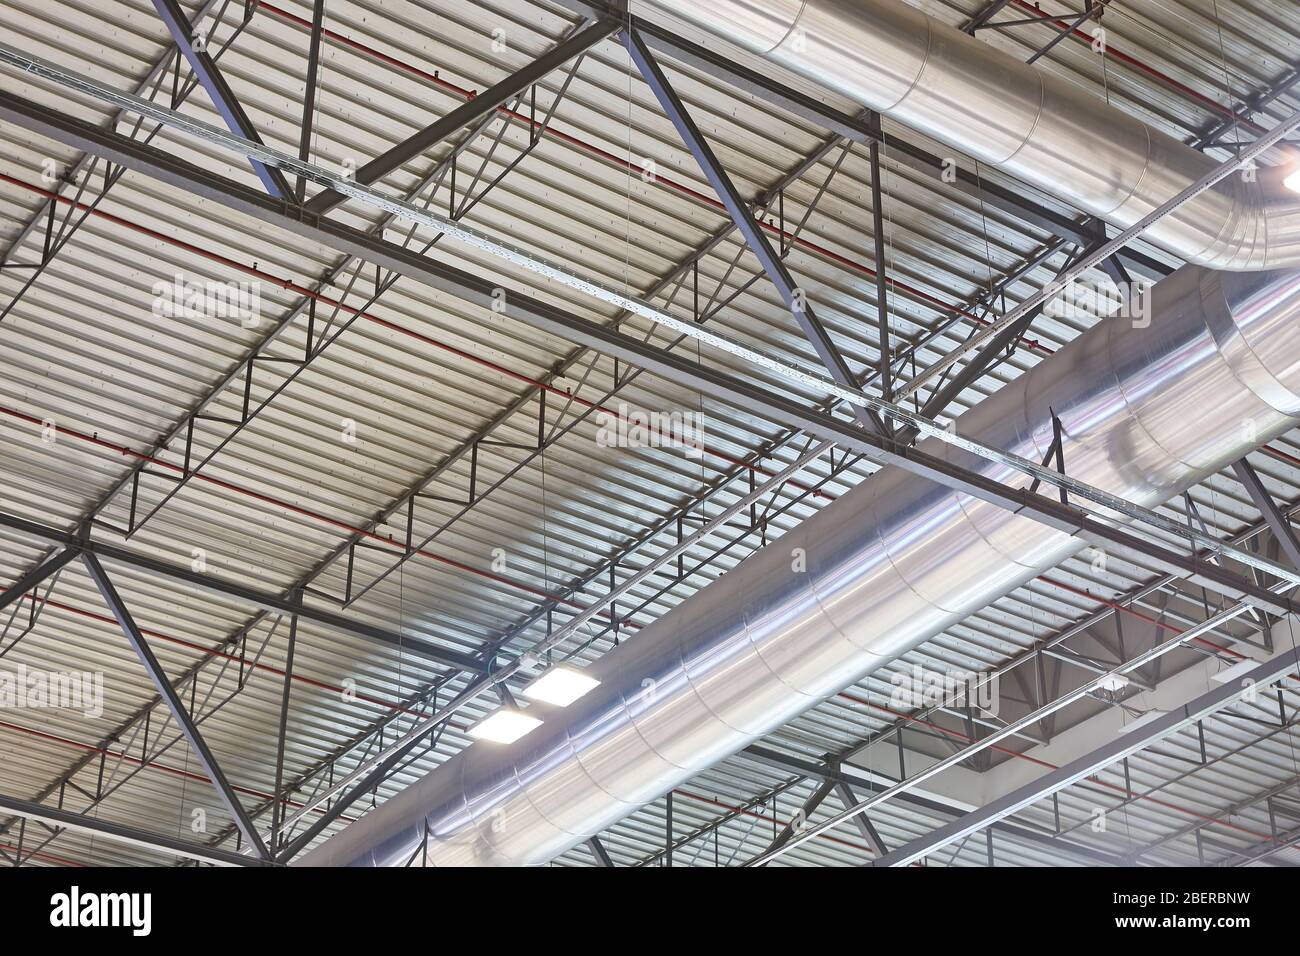 Warehouse building roof stainless air pipes. Climate ventilation structure  equipment Stock Photo - Alamy